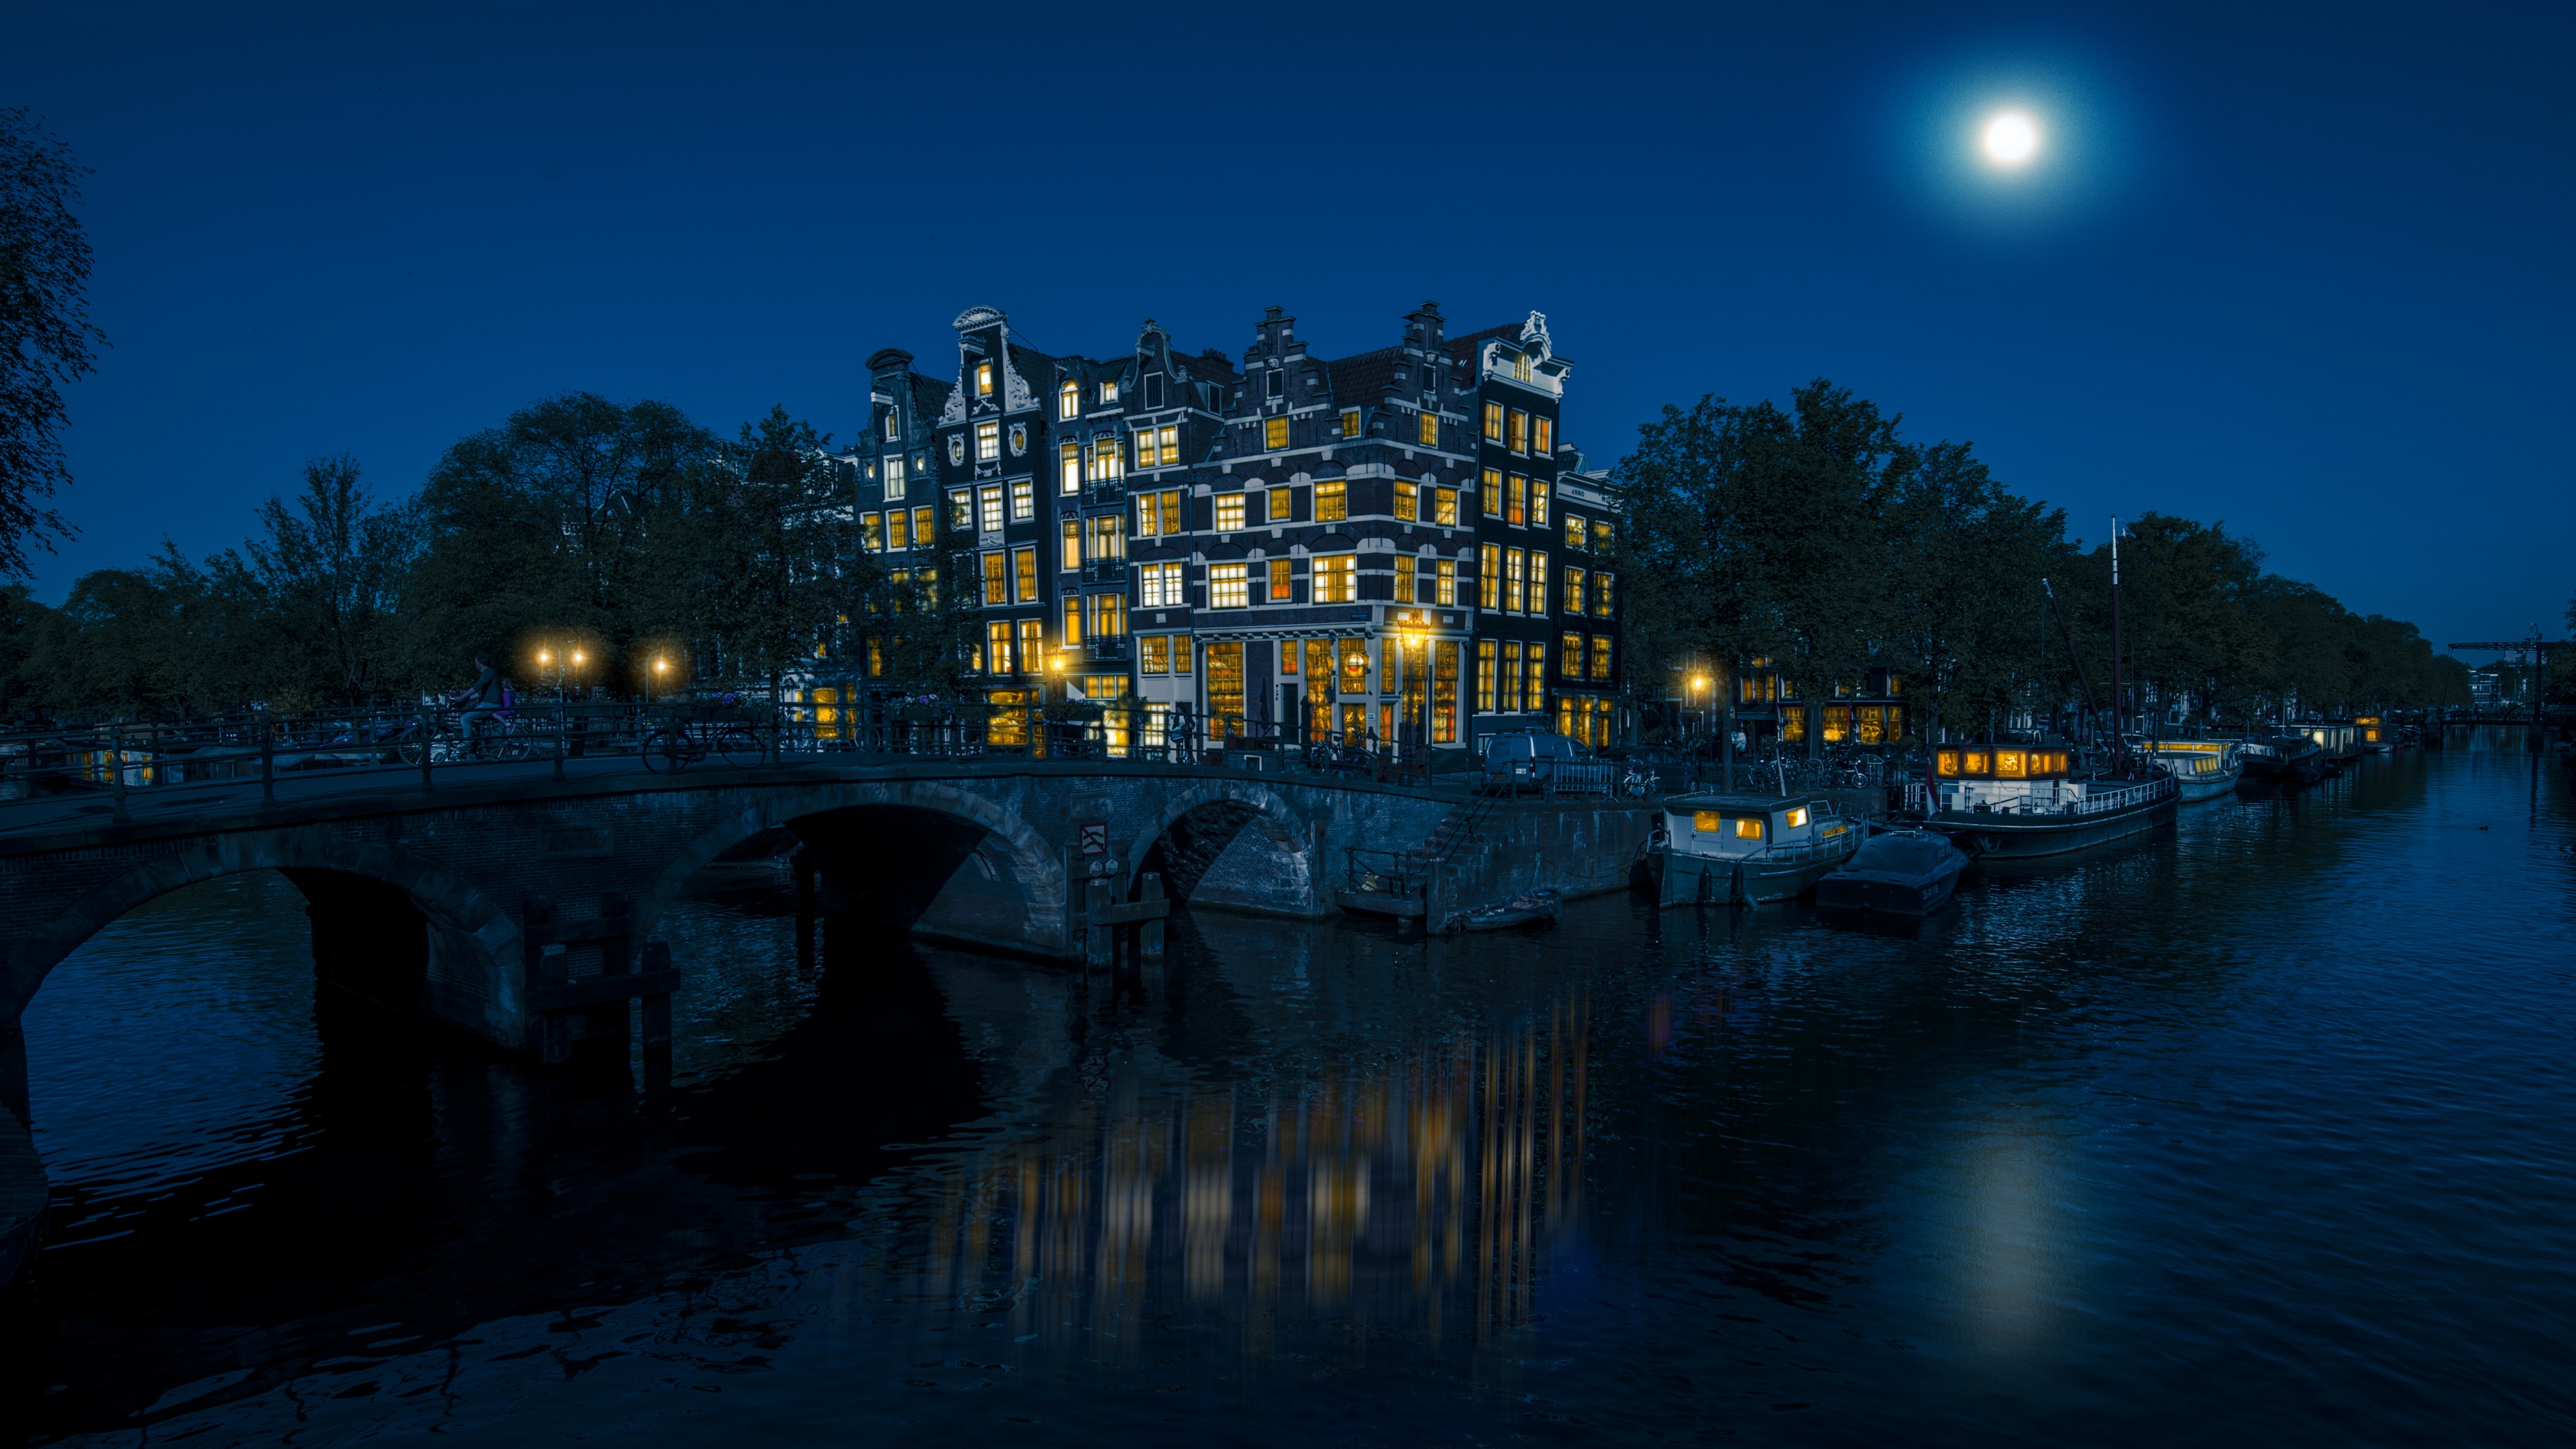 General 3840x2160 city cityscape architecture lights building bridge water river trees Amsterdam night Netherlands Moon moonlight reflection boat bicycle bar low light